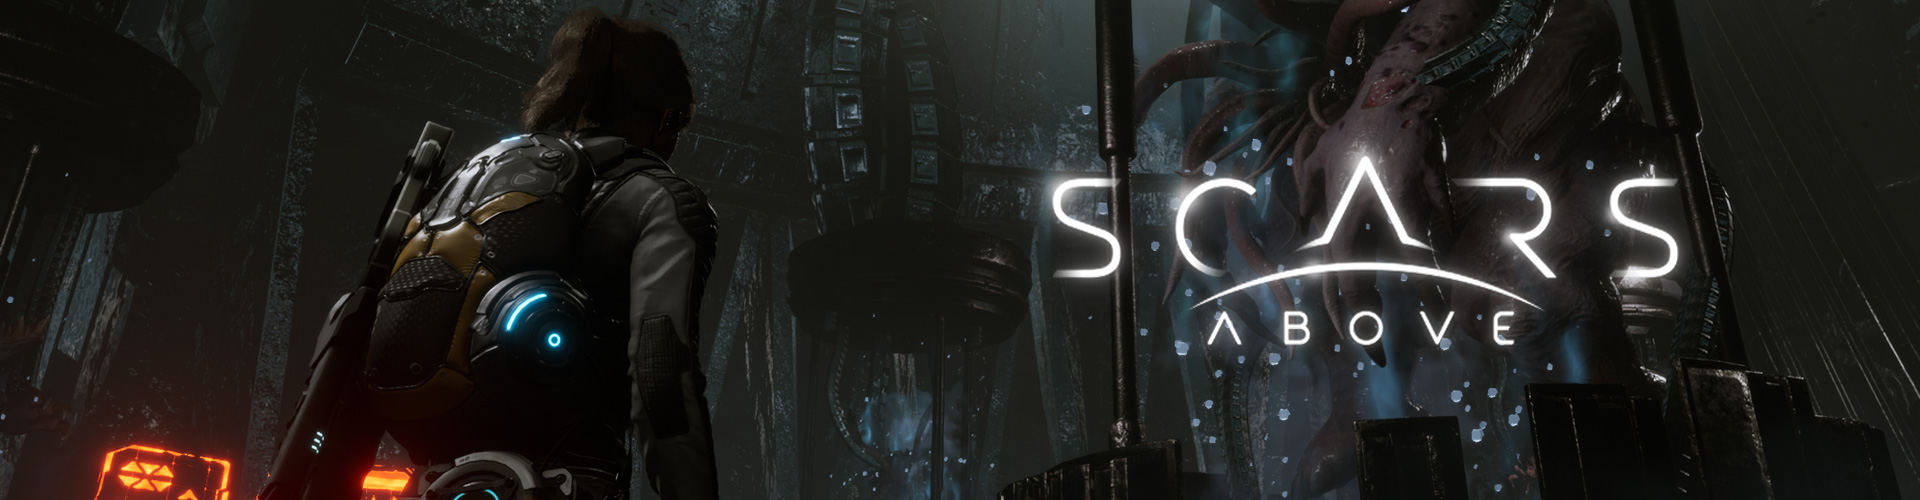 Scars Above: een third-person science fiction horror game